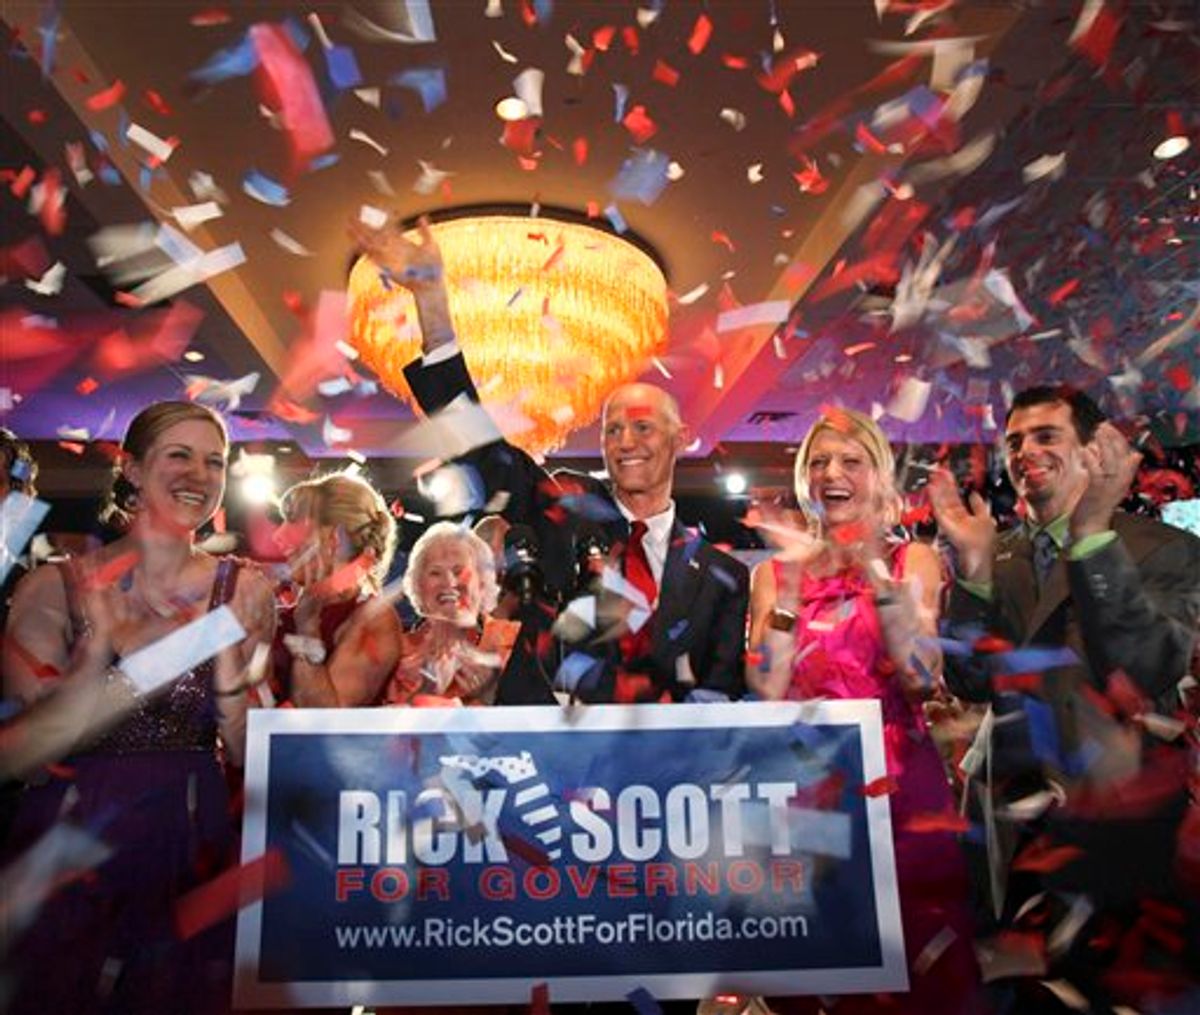 Surrounded by family, Republican gubernatorial candidate Rick Scott celebrates with supporters Tuesday, Aug. 24, 2010, in Fort Lauderdale, Fla. Florida's Republican voters chose Scott over career public servant Bill McCollum as their candidate for governor. (AP Photo/Wilfredo Lee) (AP)